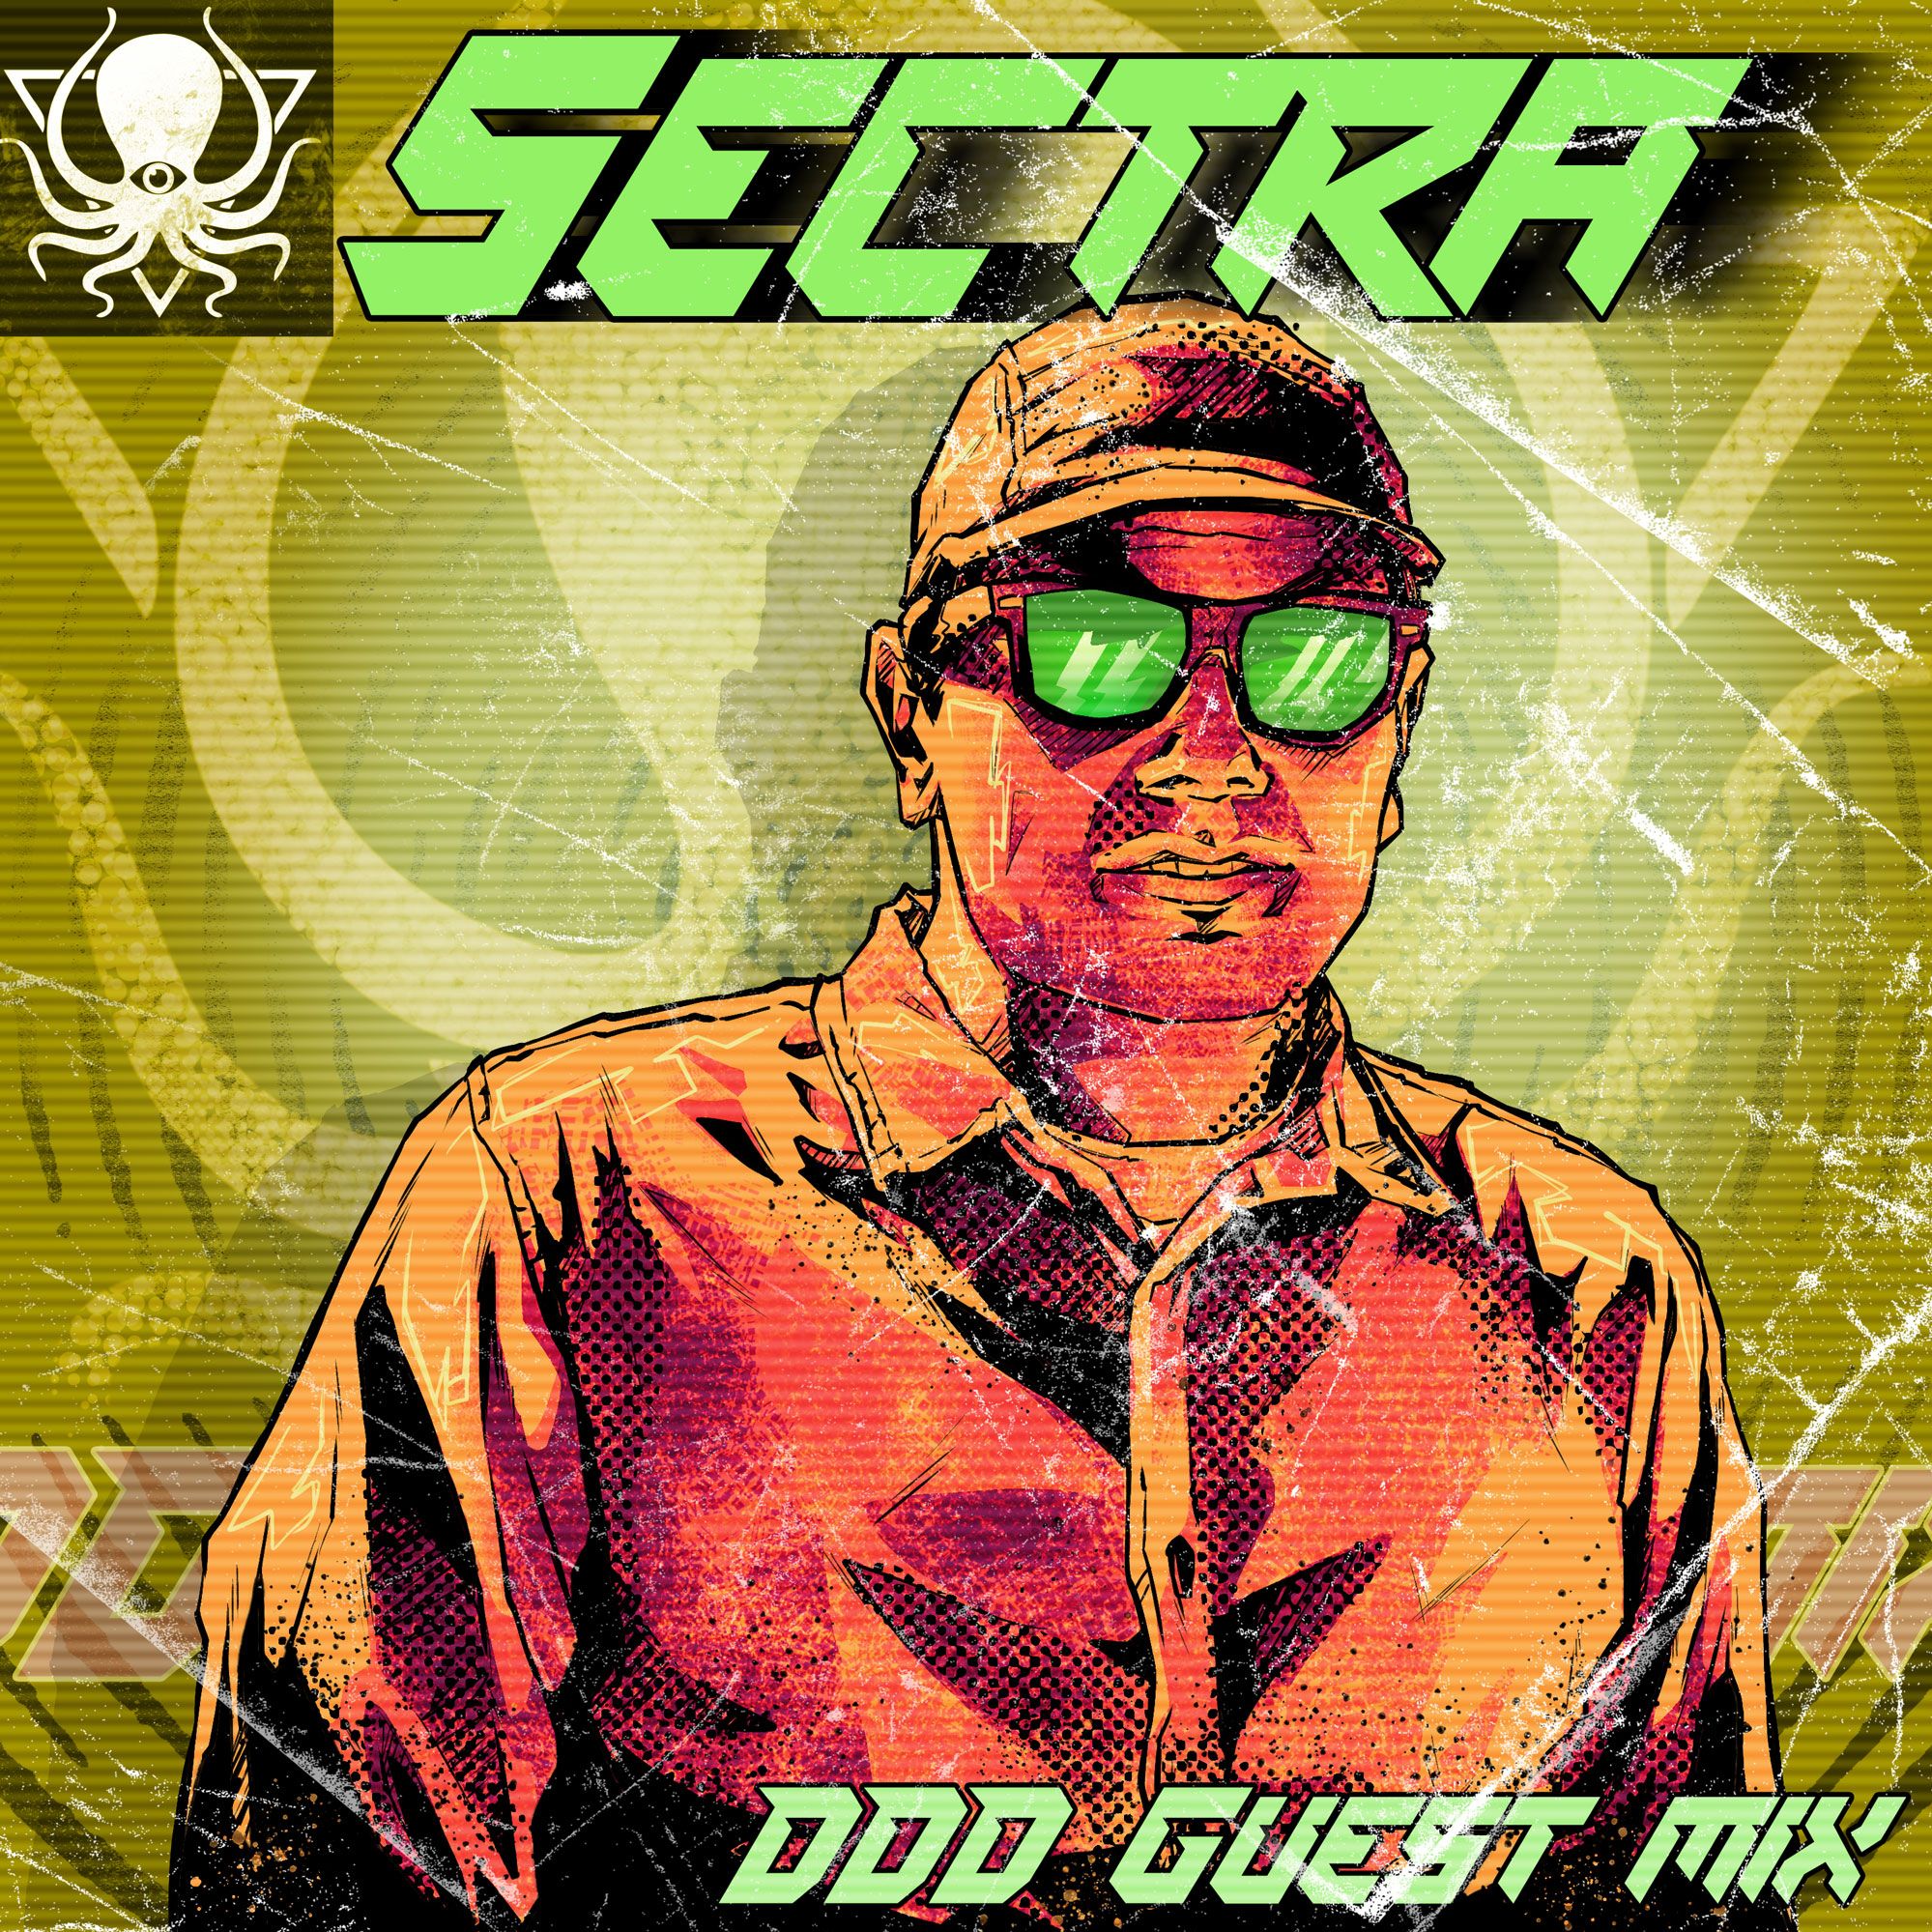 Hent Sectra - DDD Guest Mix